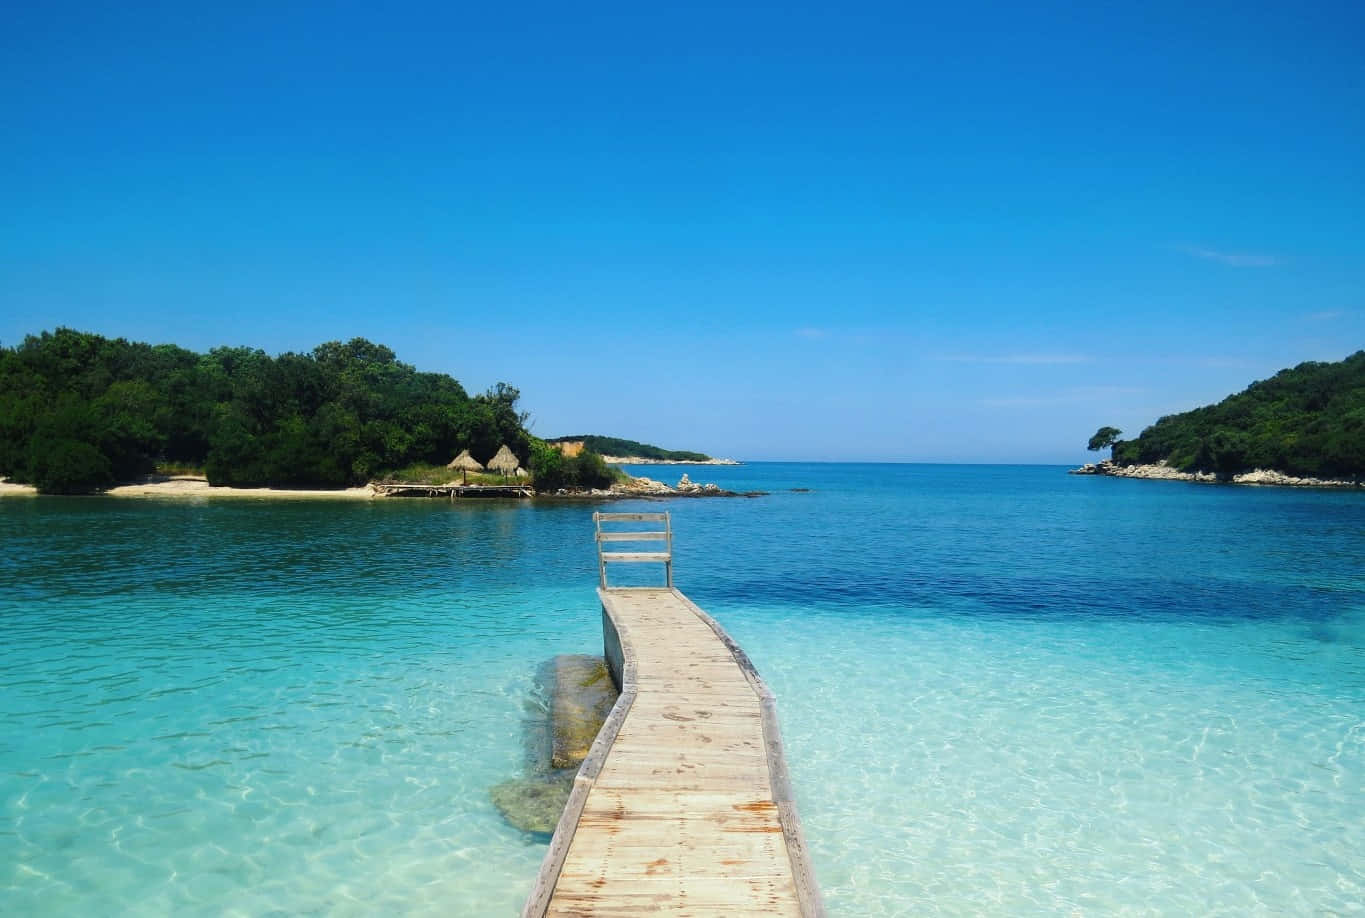 A Wooden Pier Leading To A Clear Blue Water